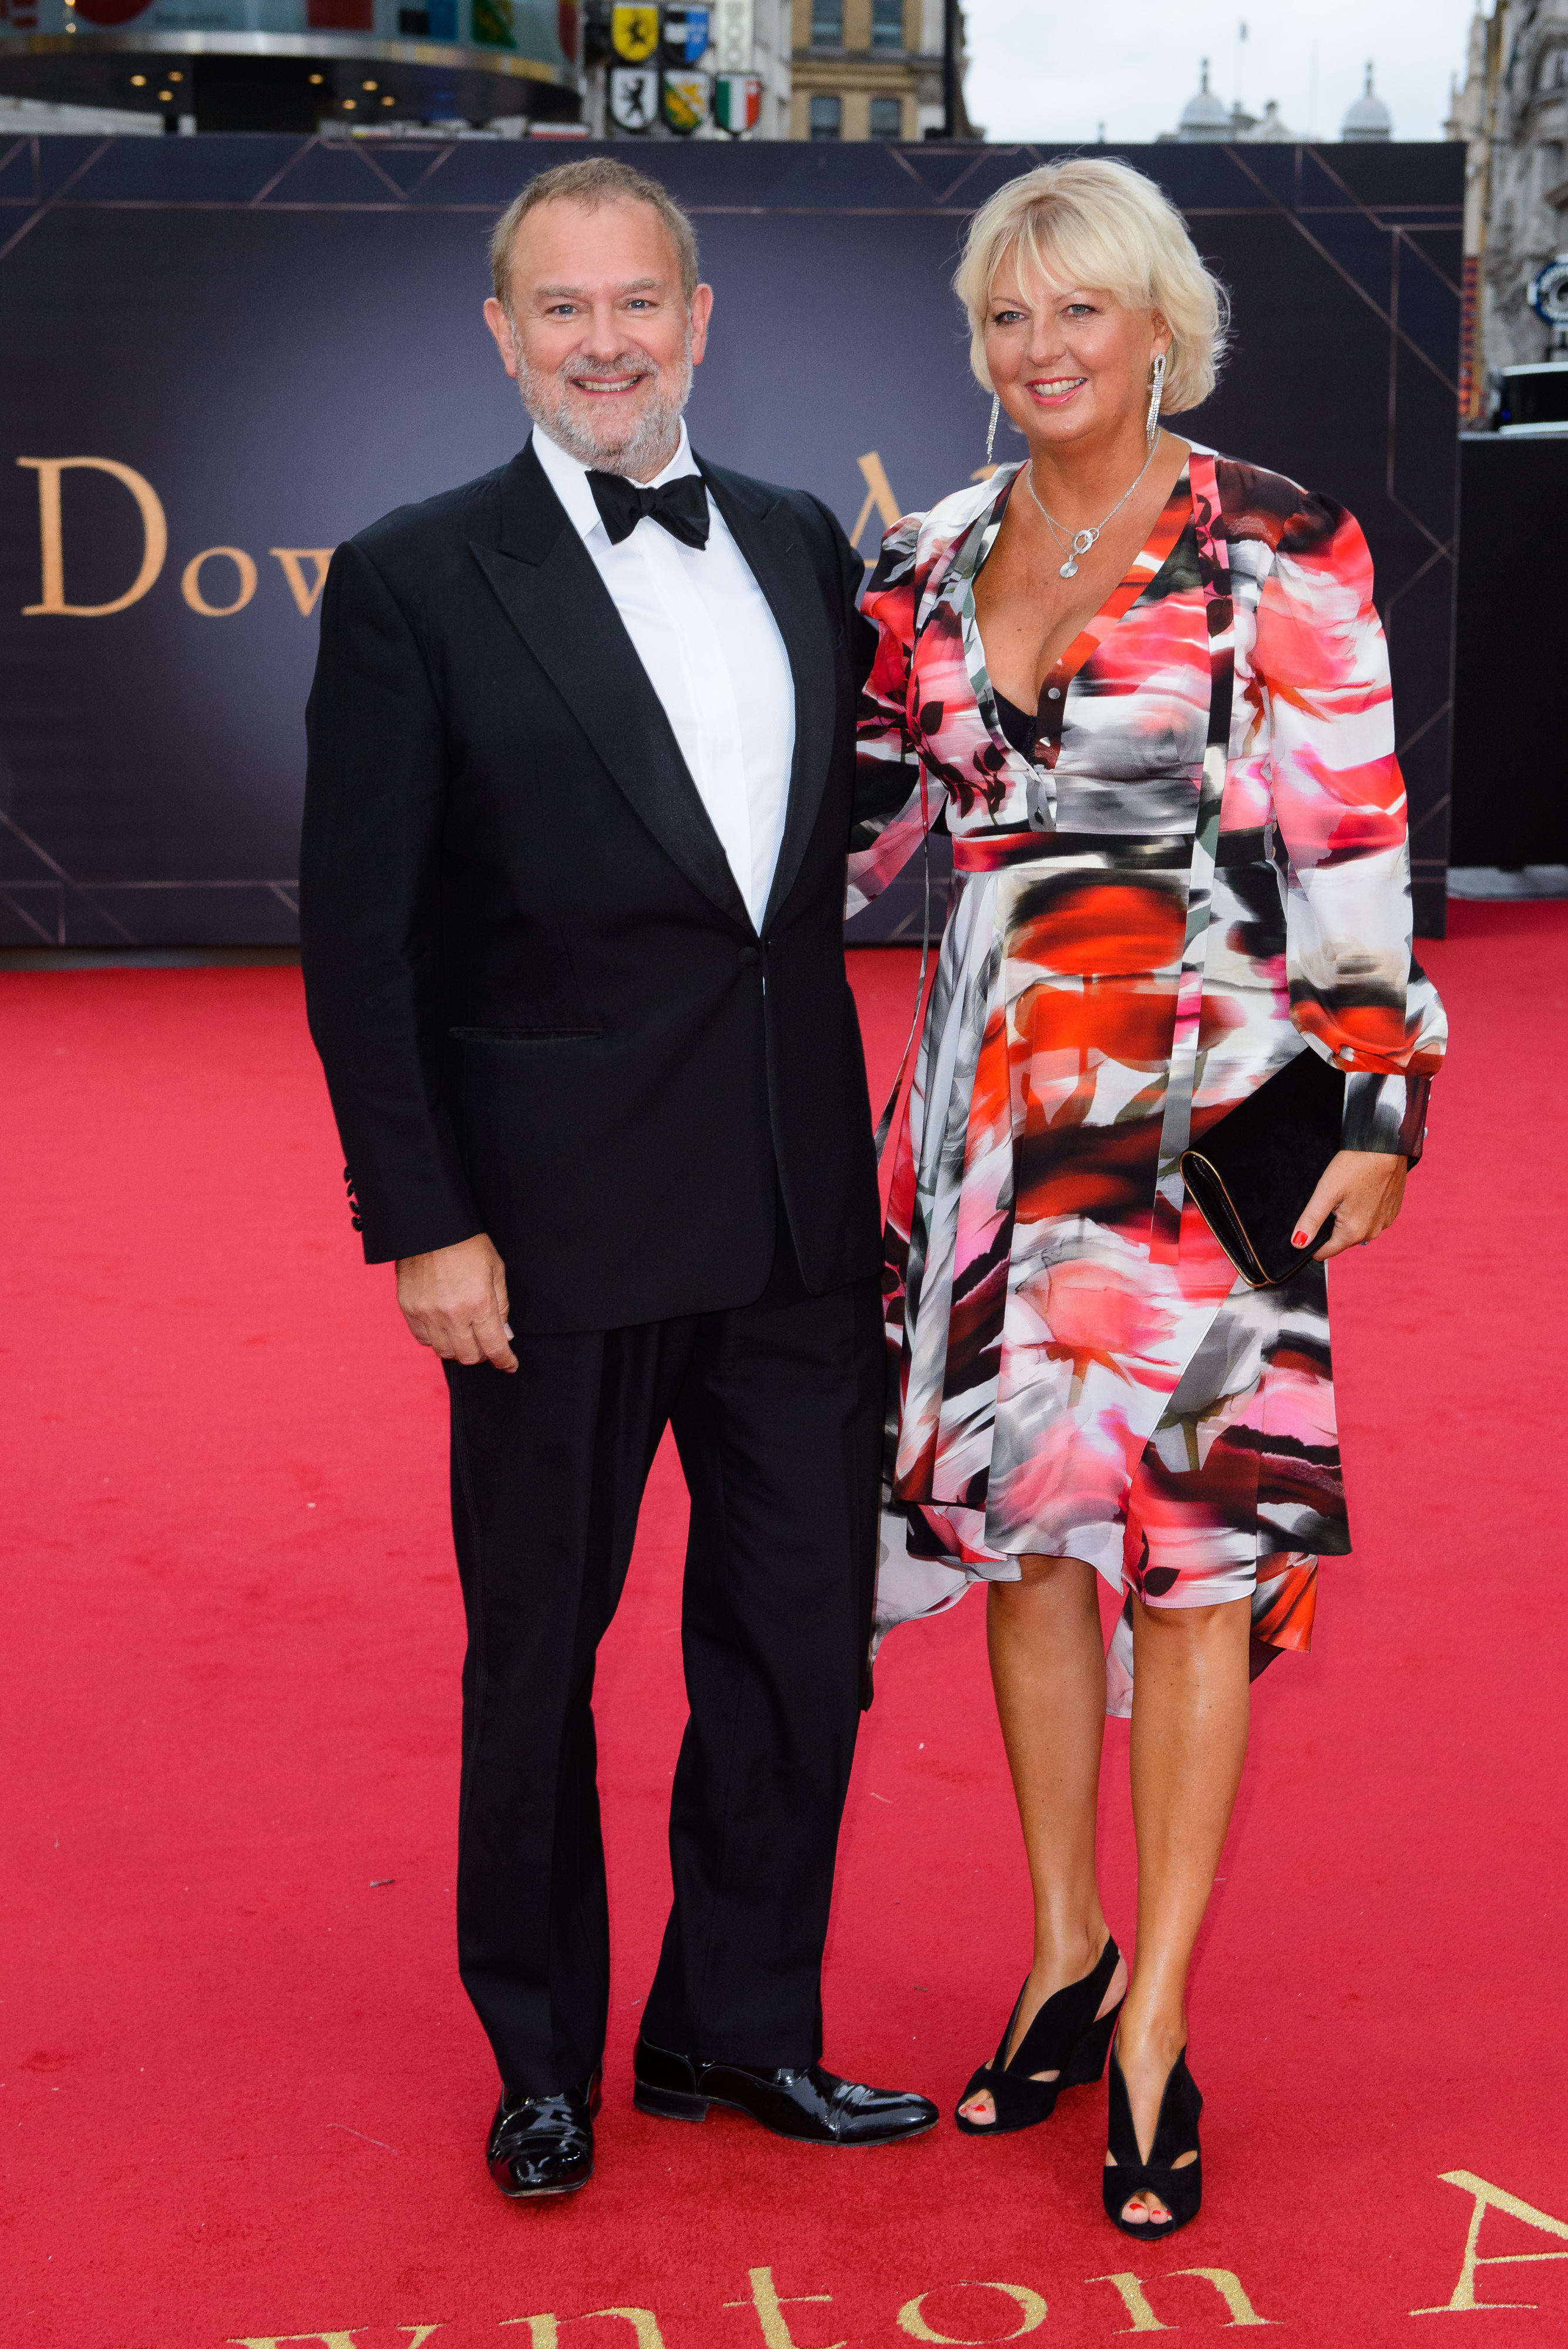 Hugh with with now ex-wife Lulu Williams at a 2019 premiere